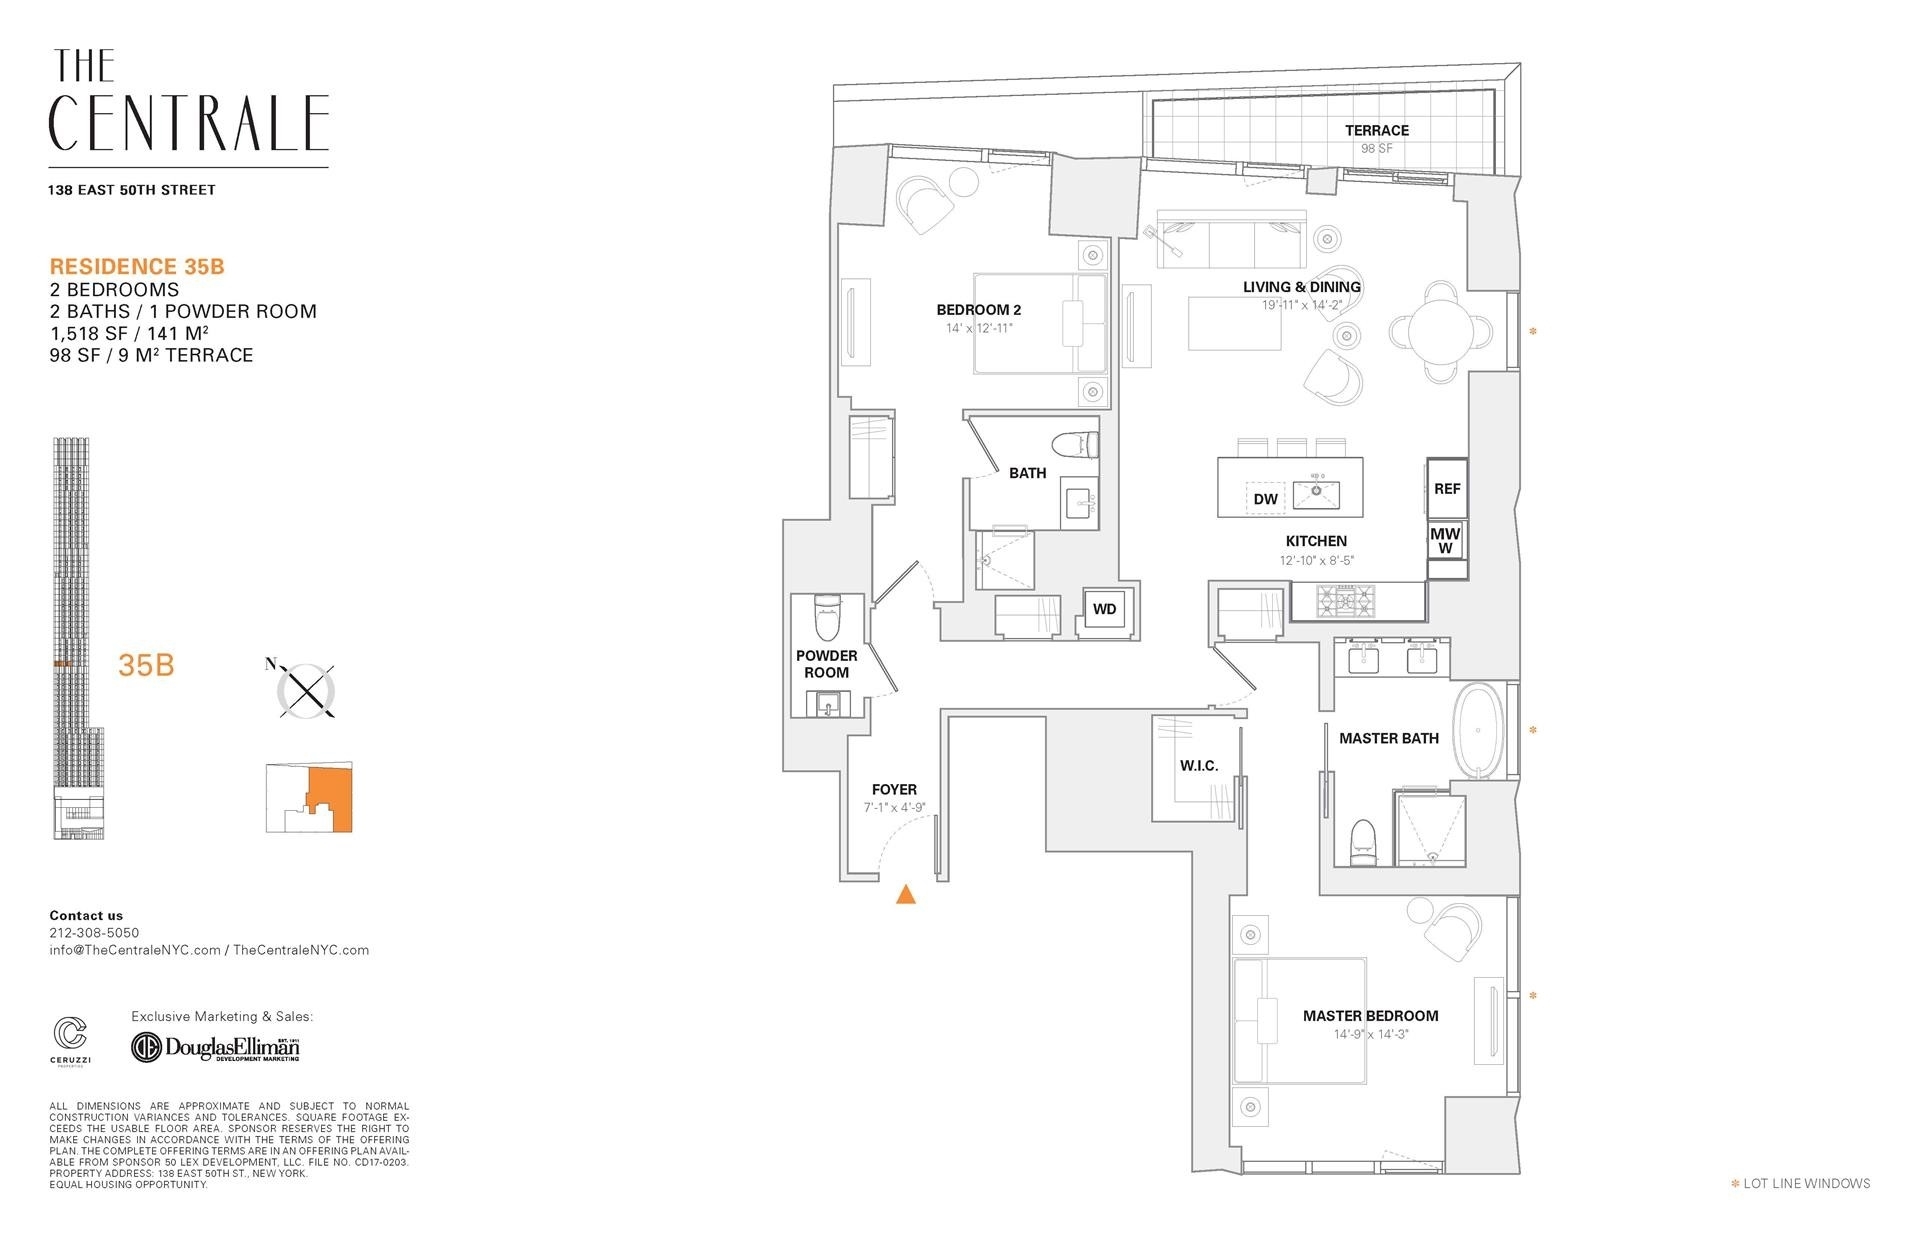 1. Condominiums for Sale at The Centrale, 138 E 50TH ST, 35B Turtle Bay, New York, NY 10022